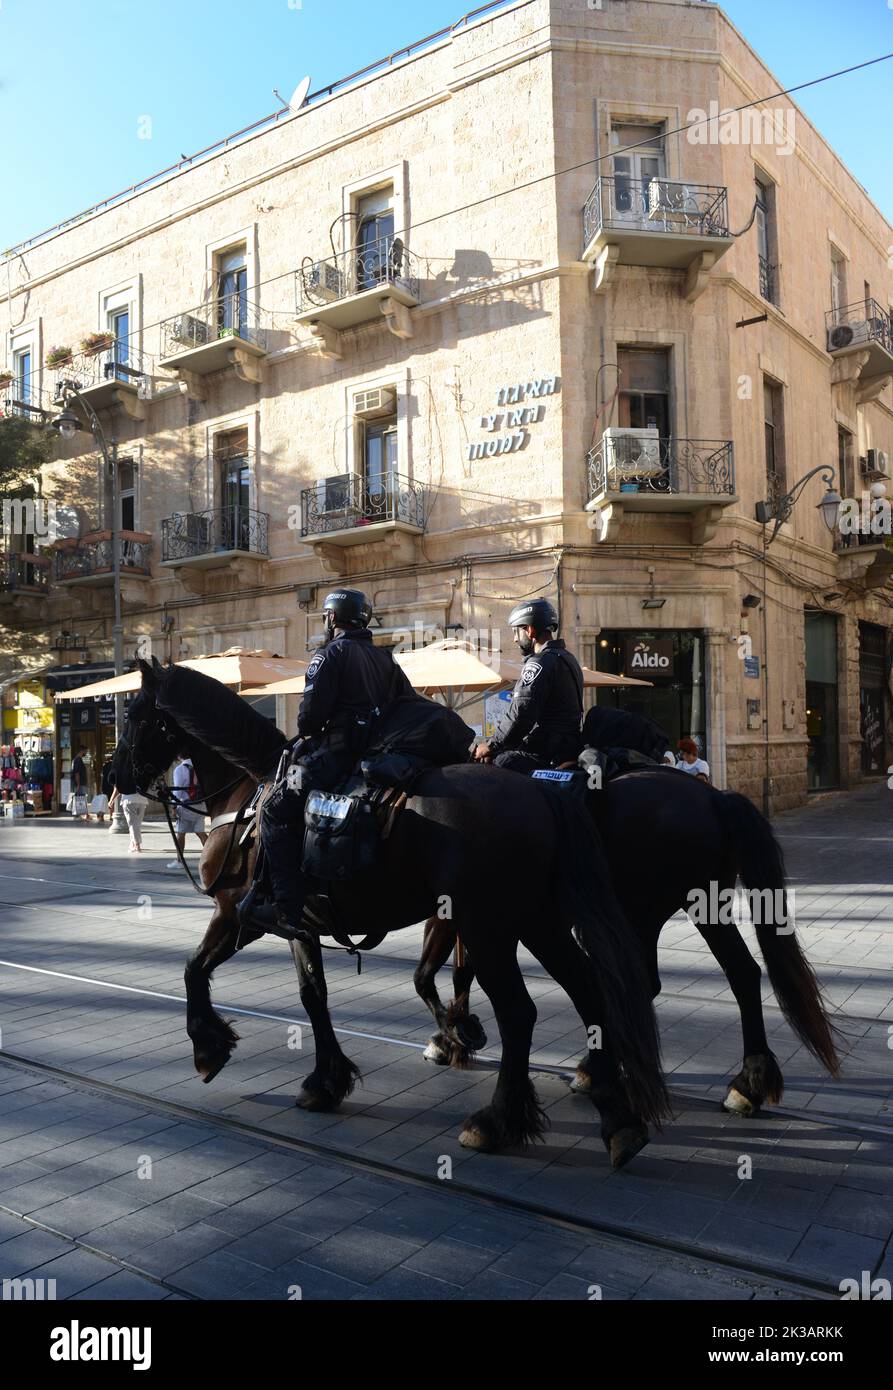 Horse mounted Israeli security forces patrolling Jaffa street in the city center of Jerusalem, Israel. Stock Photo